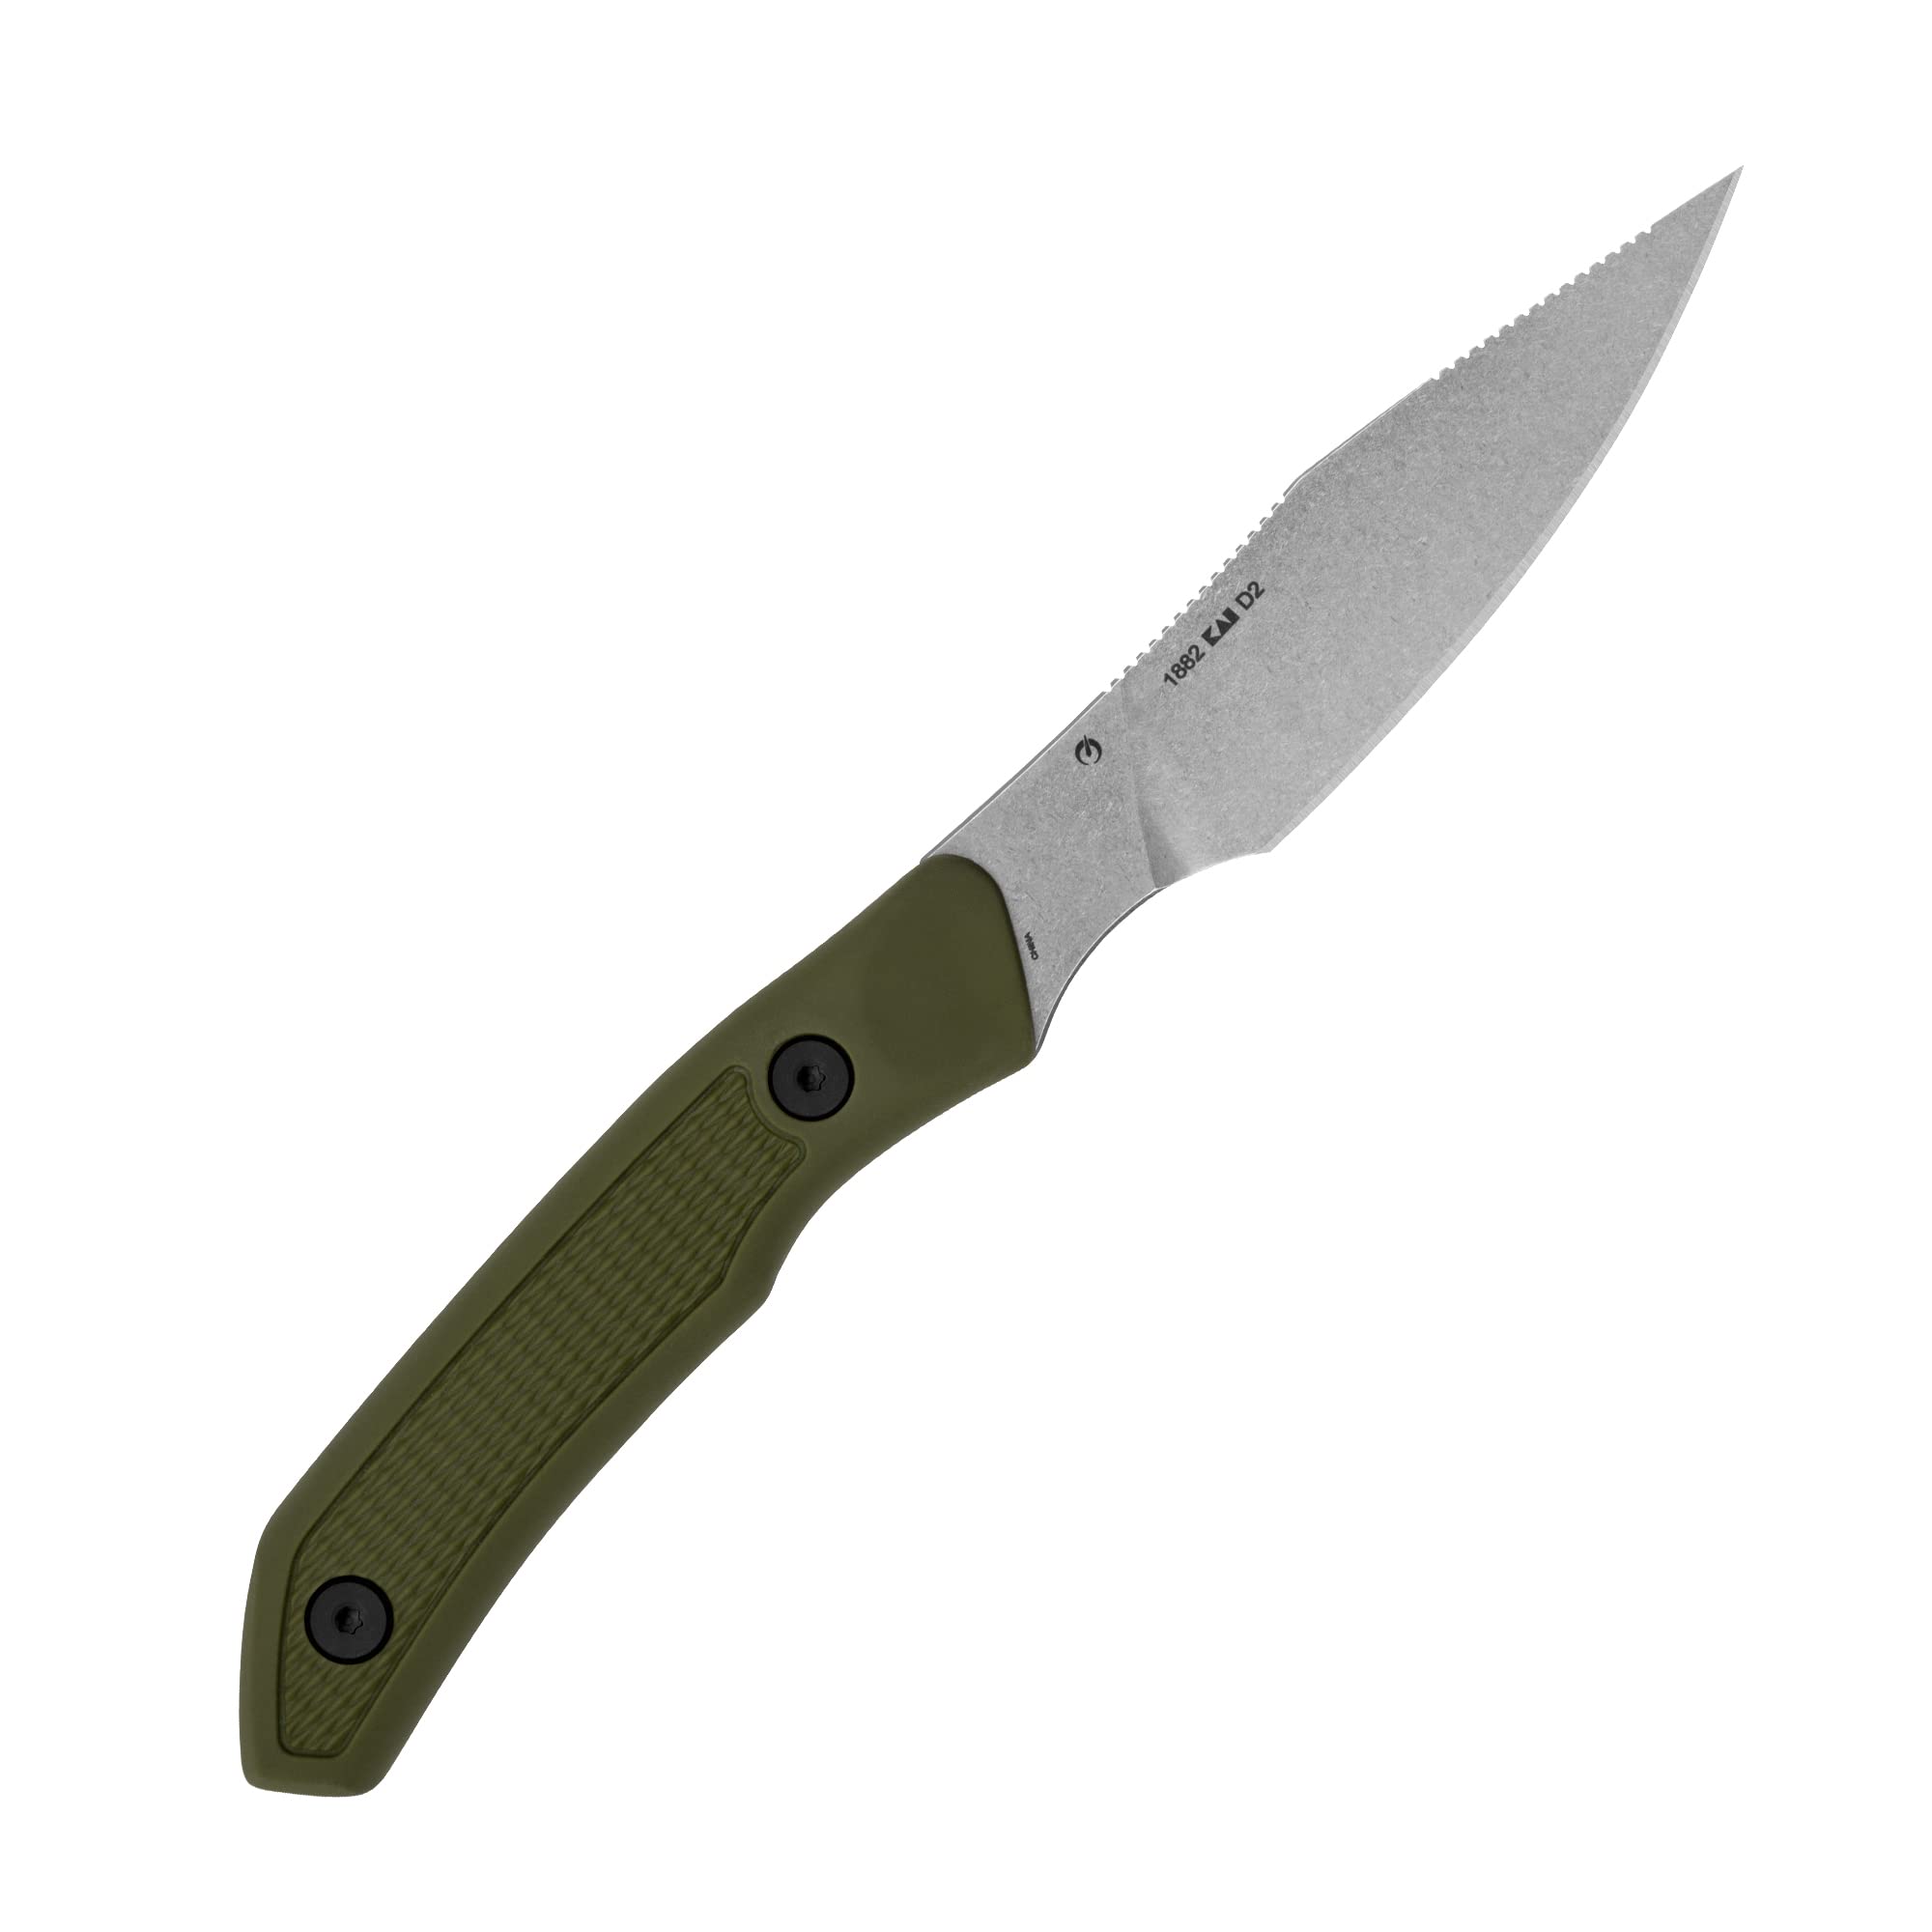 Kershaw Deschutes Caper Hunting Knife, Sharp D2 Stainless Steel Blade, Full Tang Fixed Blade for Caping, Olive Handle with Rubber Overlay, Includes Sheath and Removable Belt Strap